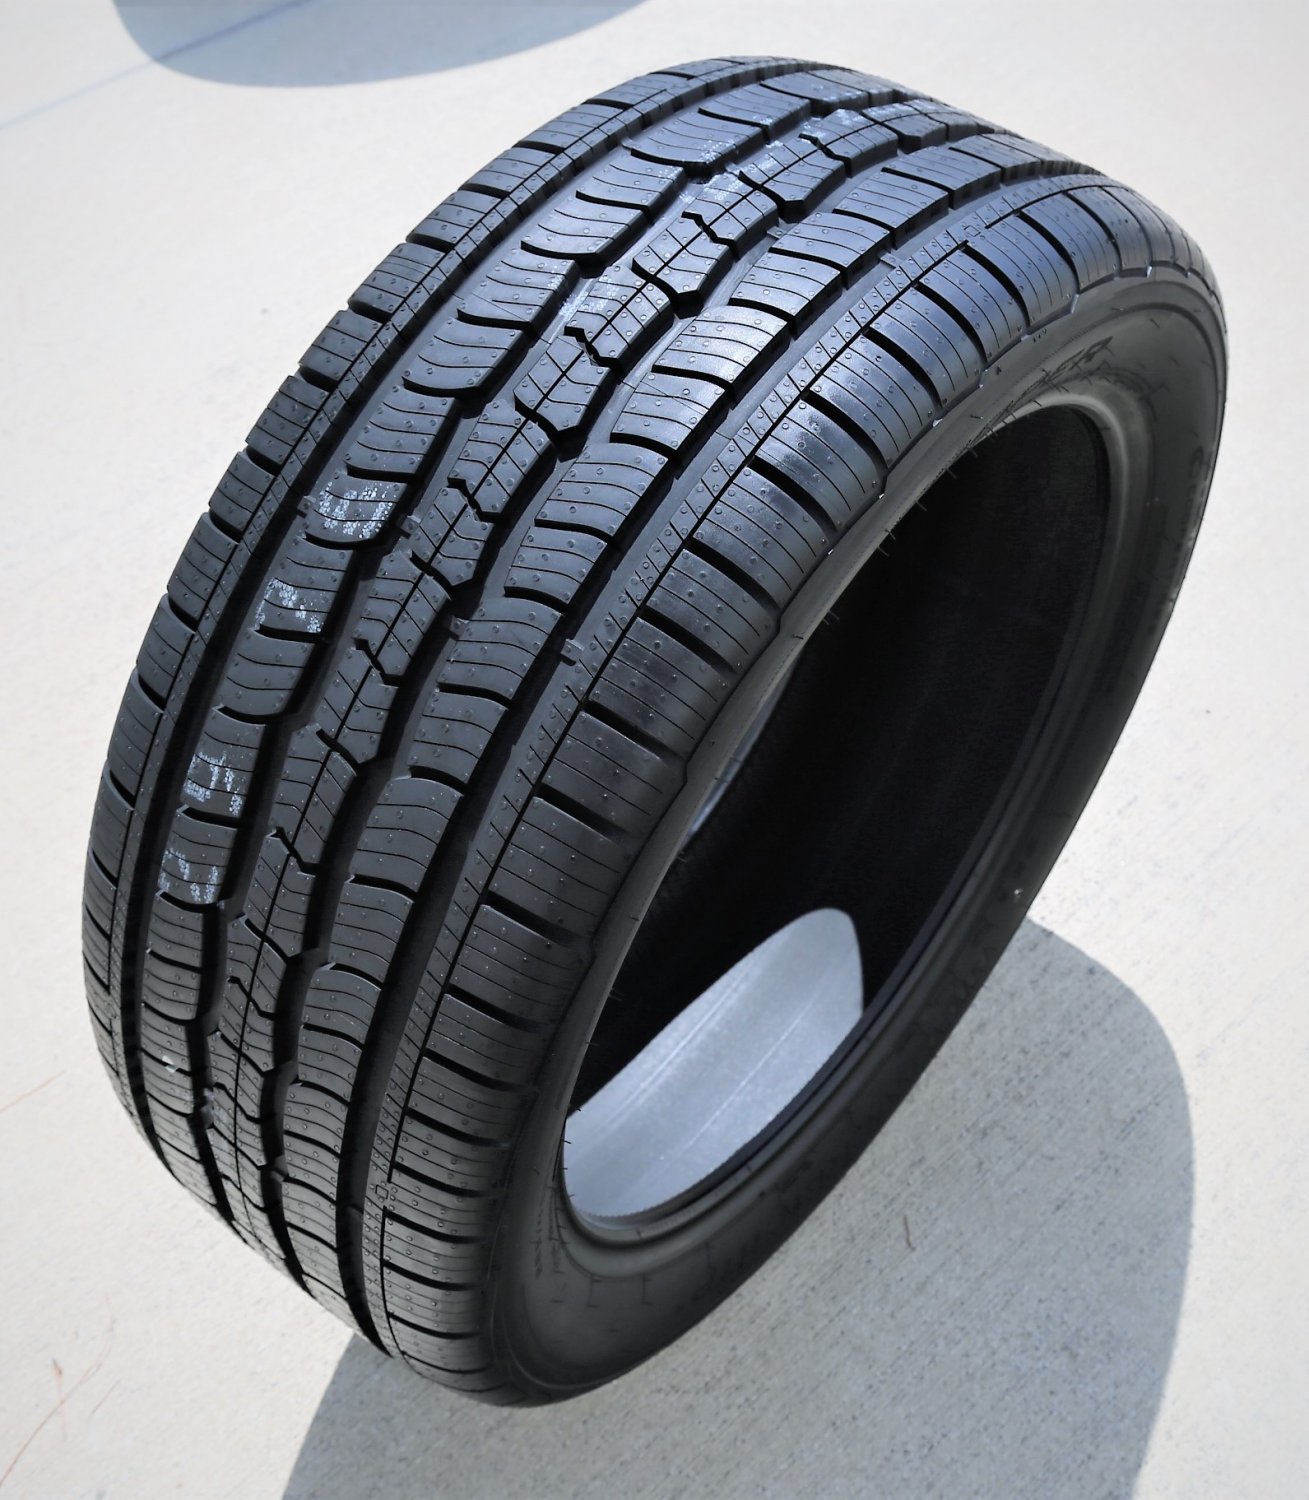 Tire Cooper Discoverer HTP II 265/65R17 112T M+S AS A/S All Season